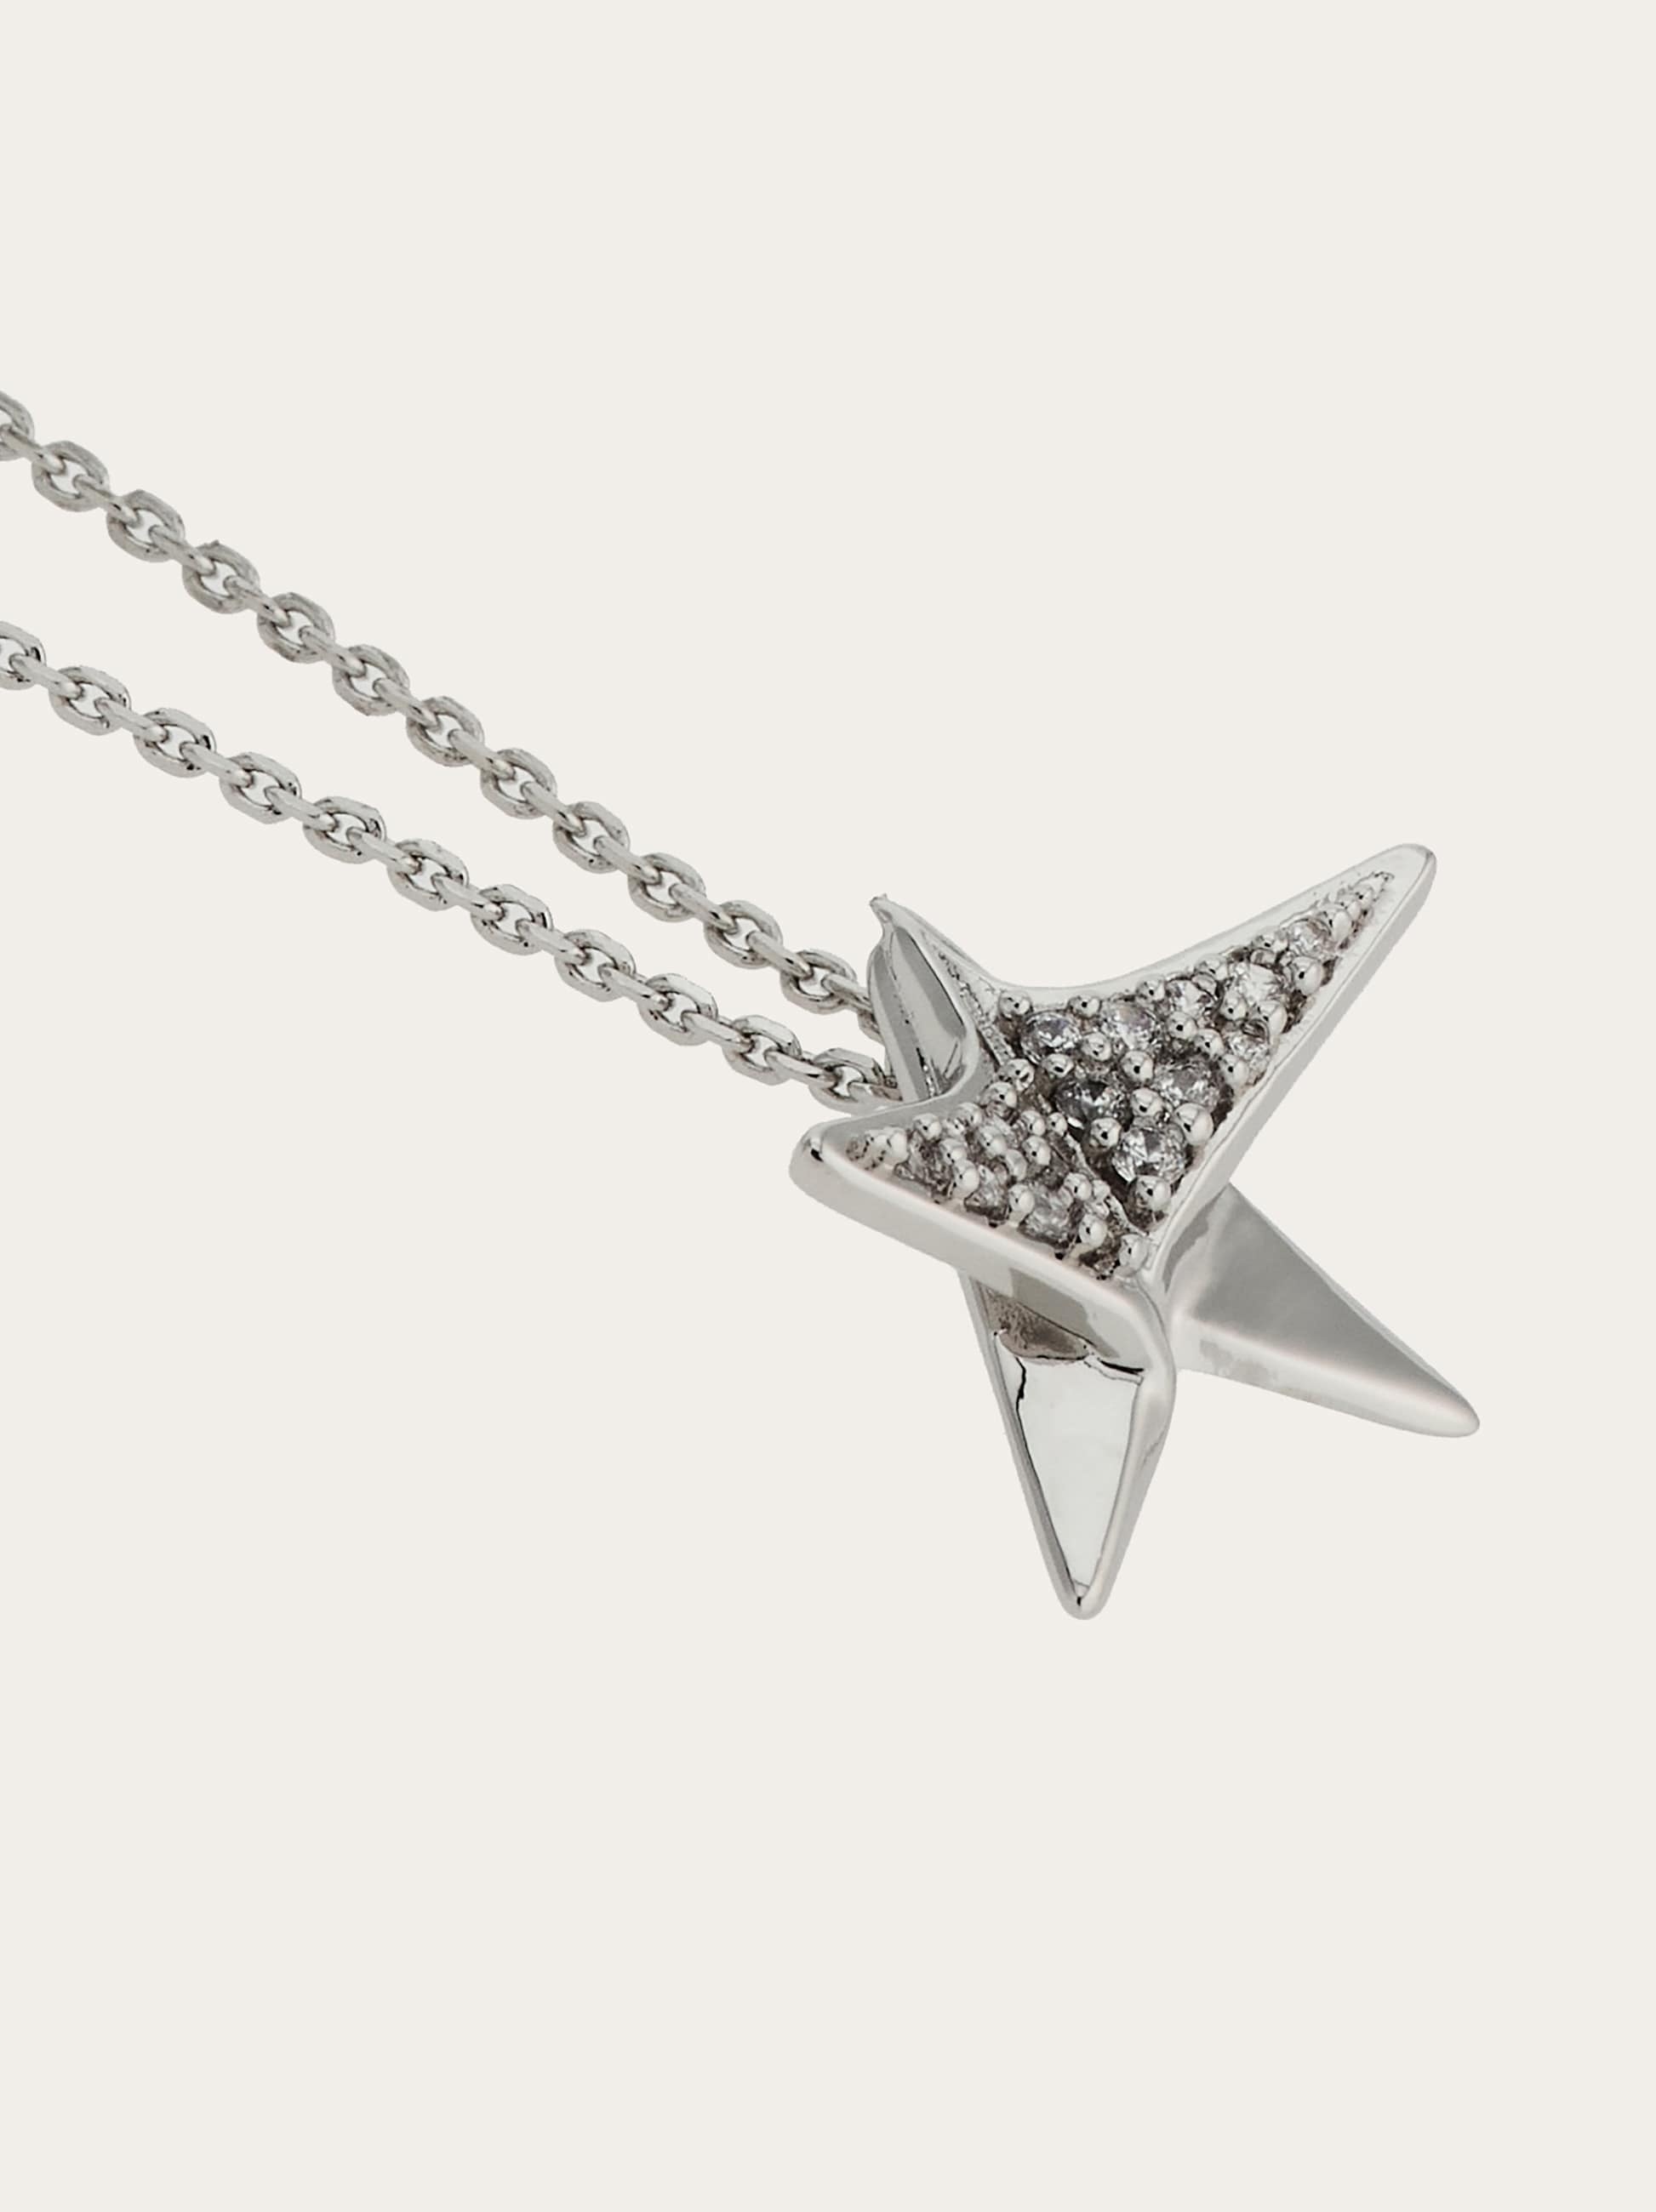 Necklace with star pendant - 4